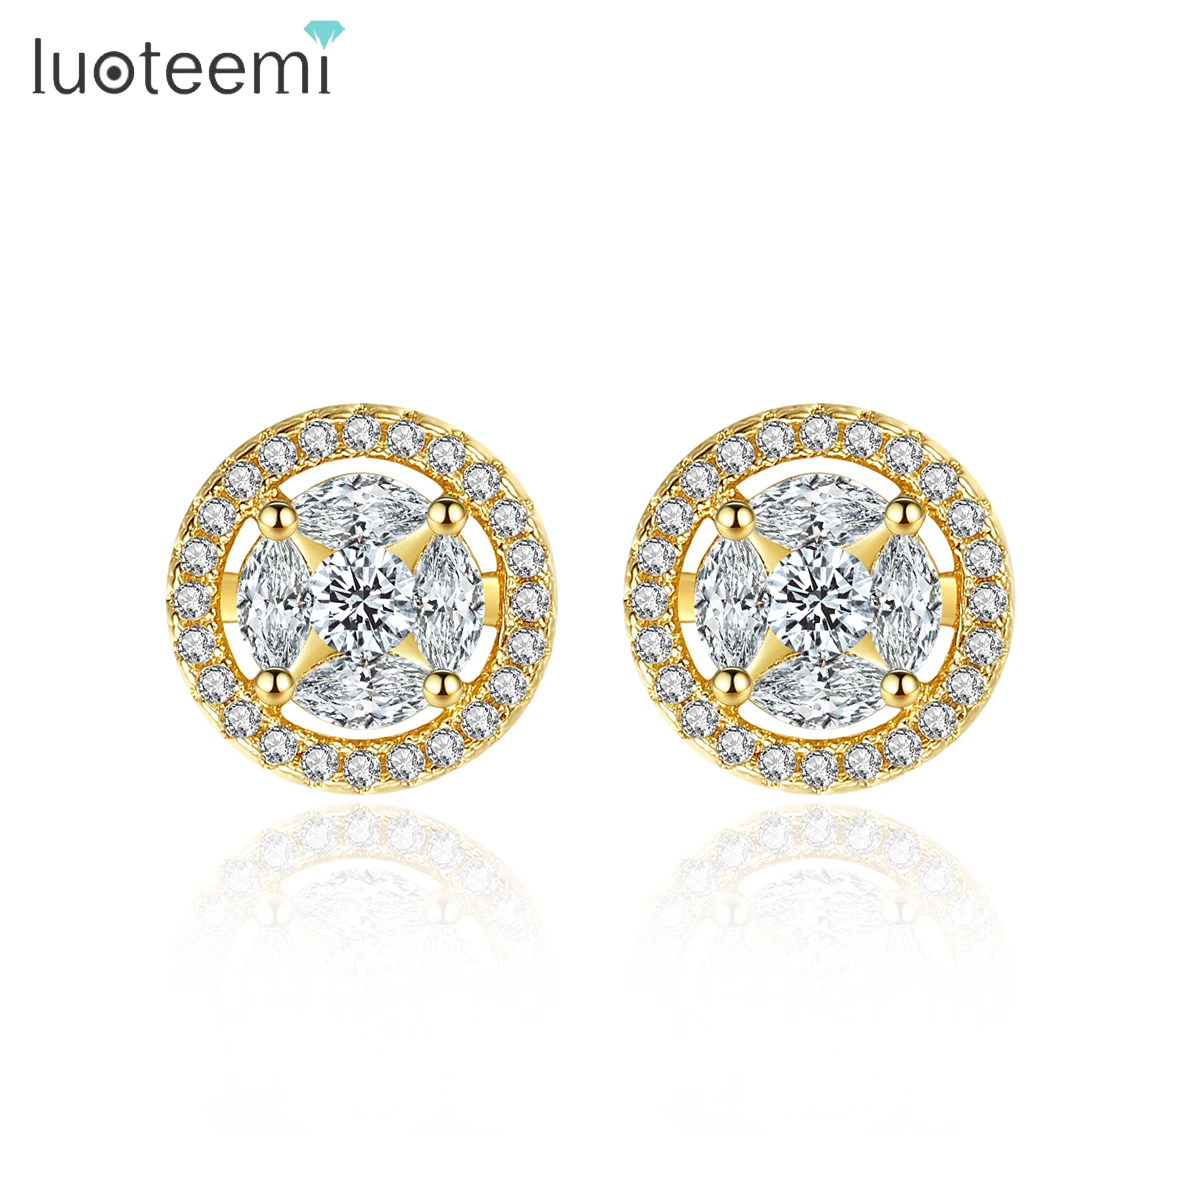 

LUOTEEMI Tiny Stud Earring for Women Cubic Zirconia Small Round Gold Color Eaarings Boucle D’oreille Femme Korean Fashion Item